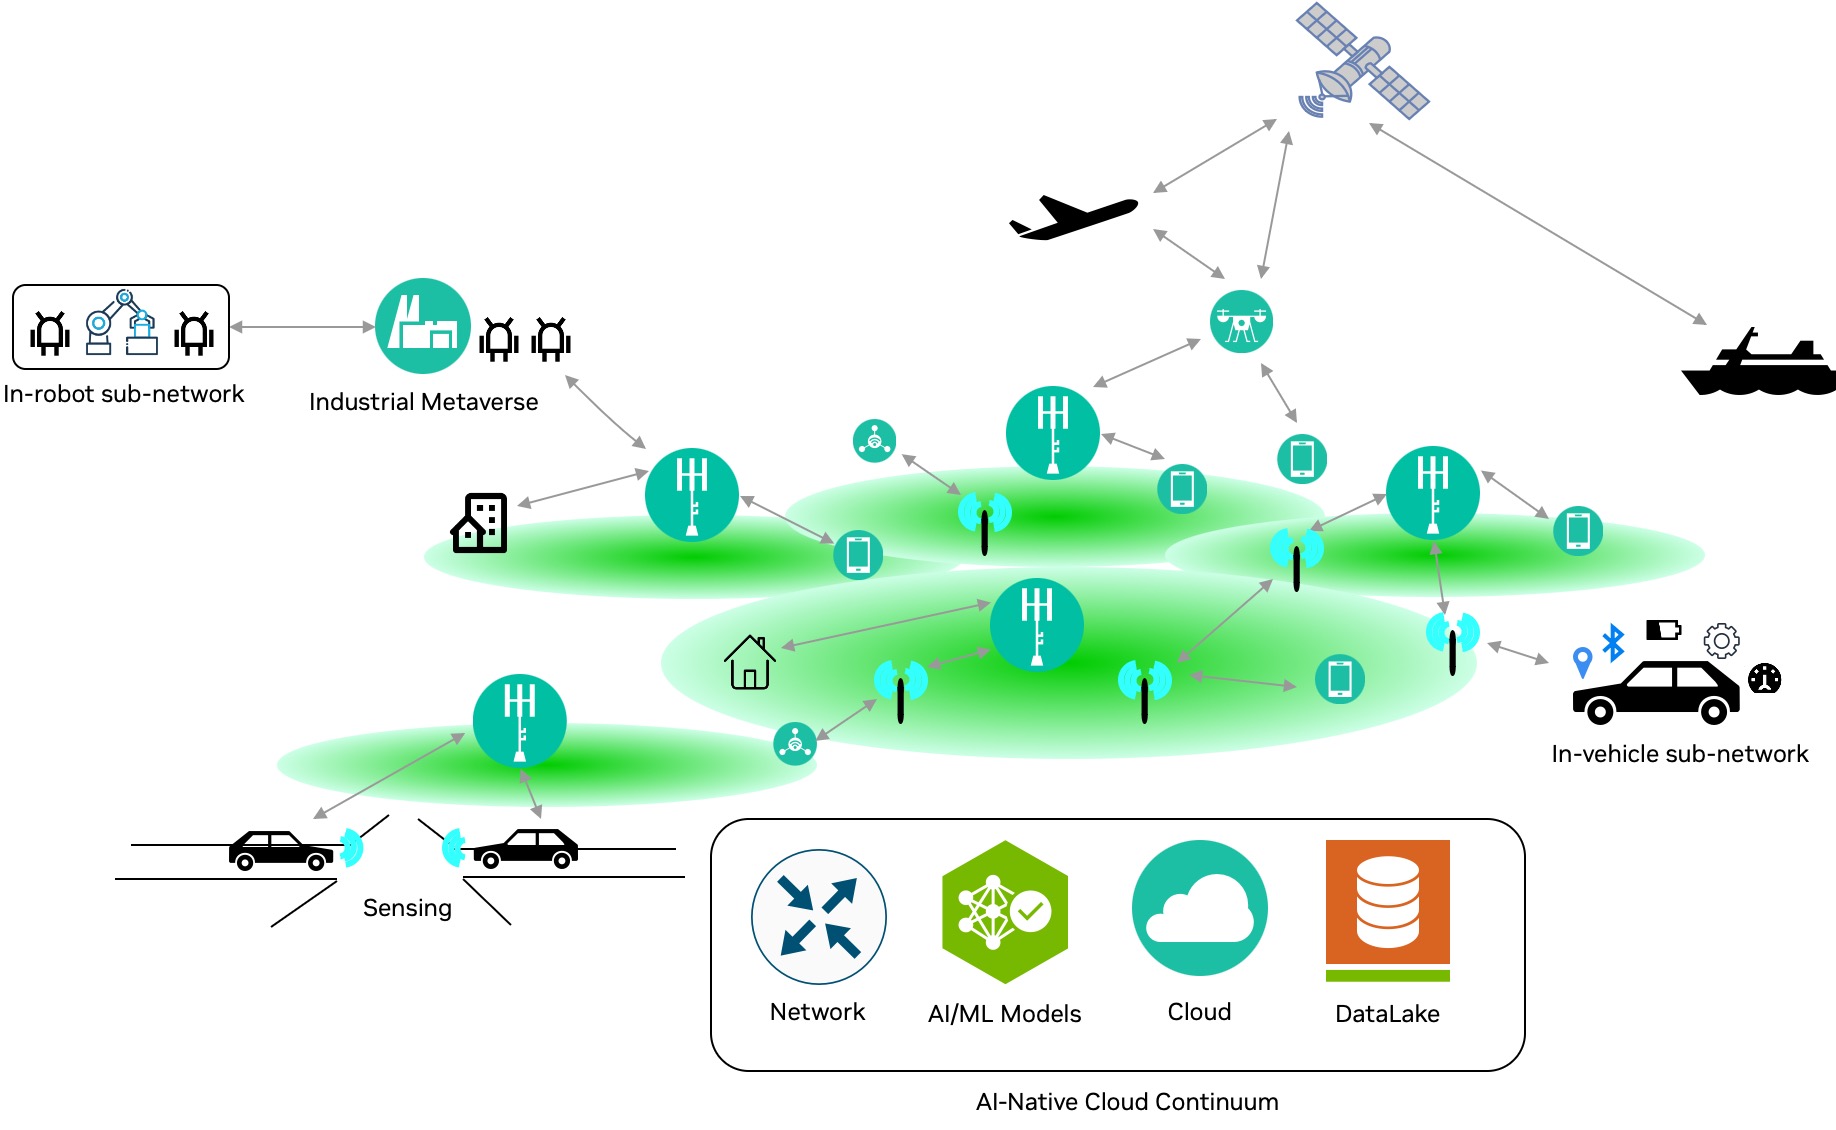 Diagram shows an ecosystem that includes in-robot subnetwork, industrial metaverse, in-vehicle subnetwork and many homes, offices, planes, and ships linked by an AI-native cloud continuum.